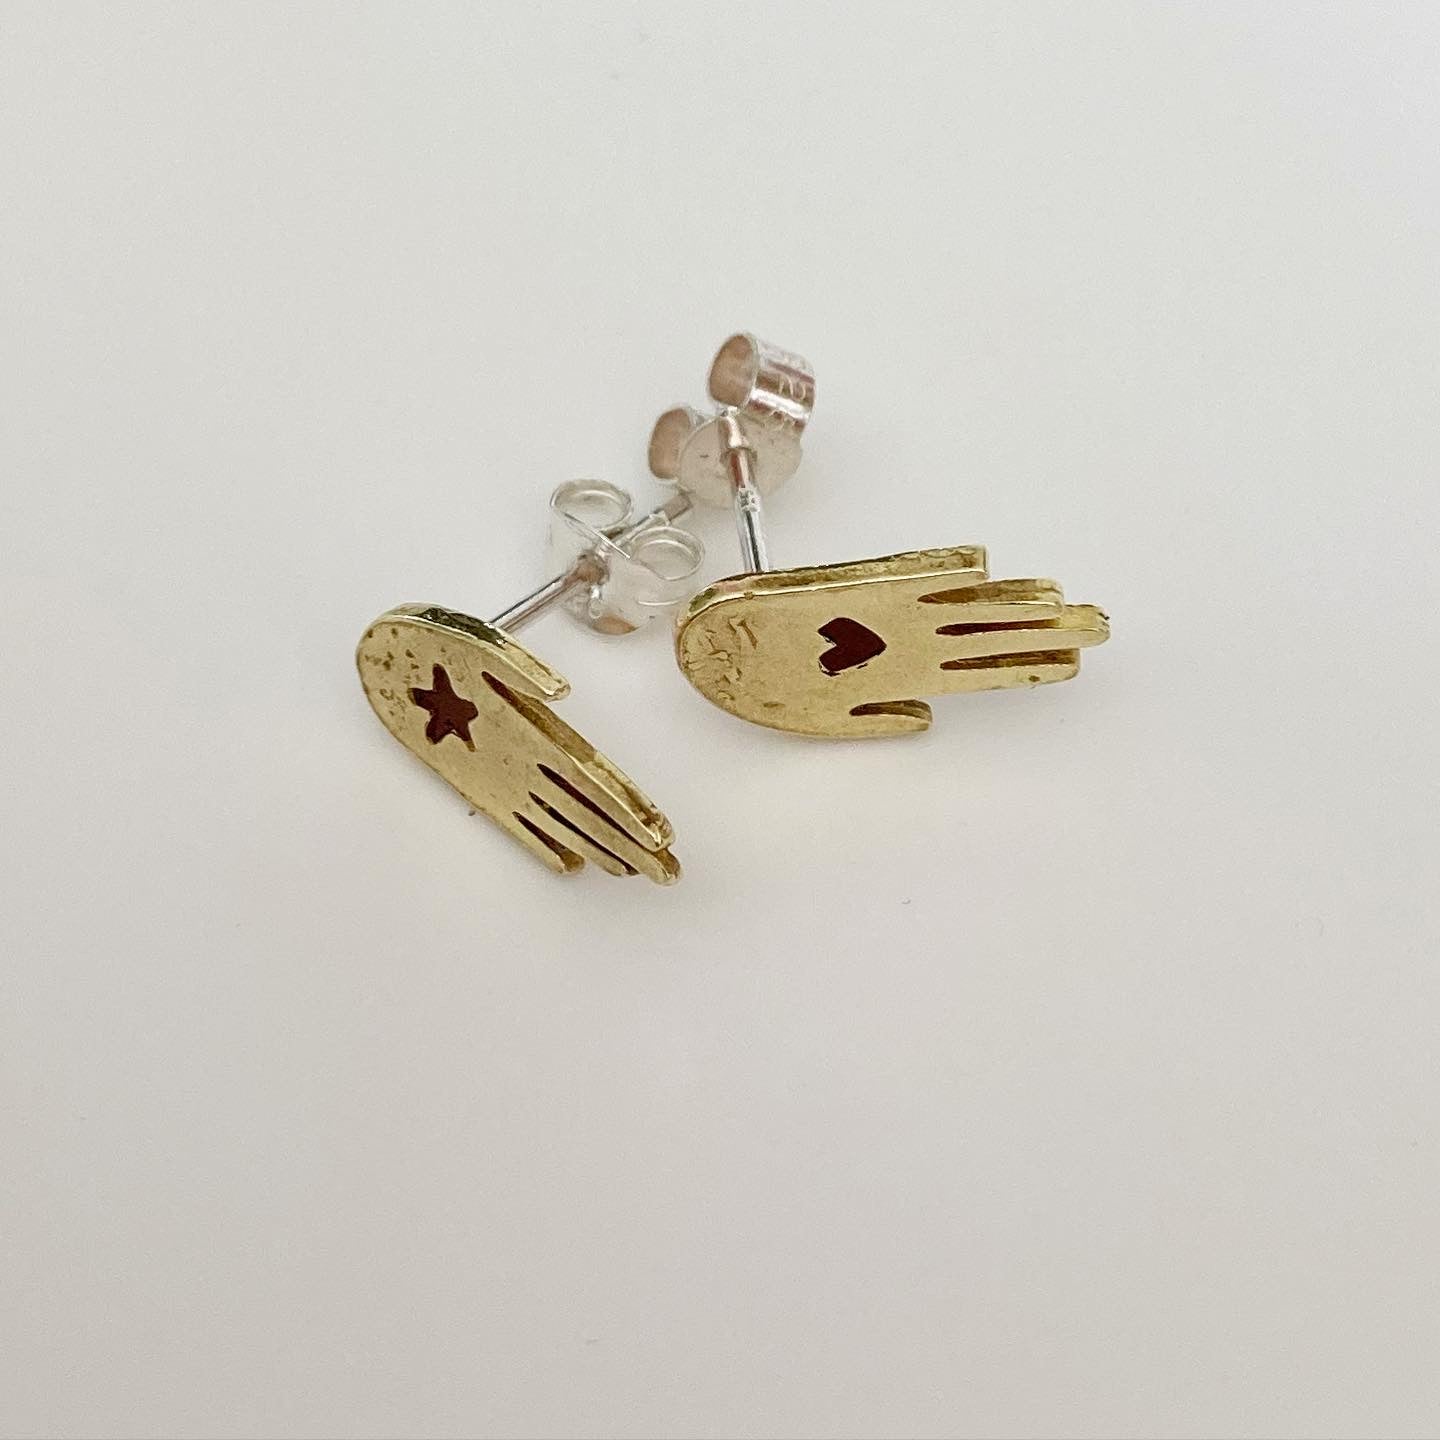 BESTOWAL Gold Brass Hand Studs with Heart and Star design - Sterling Silver Backs